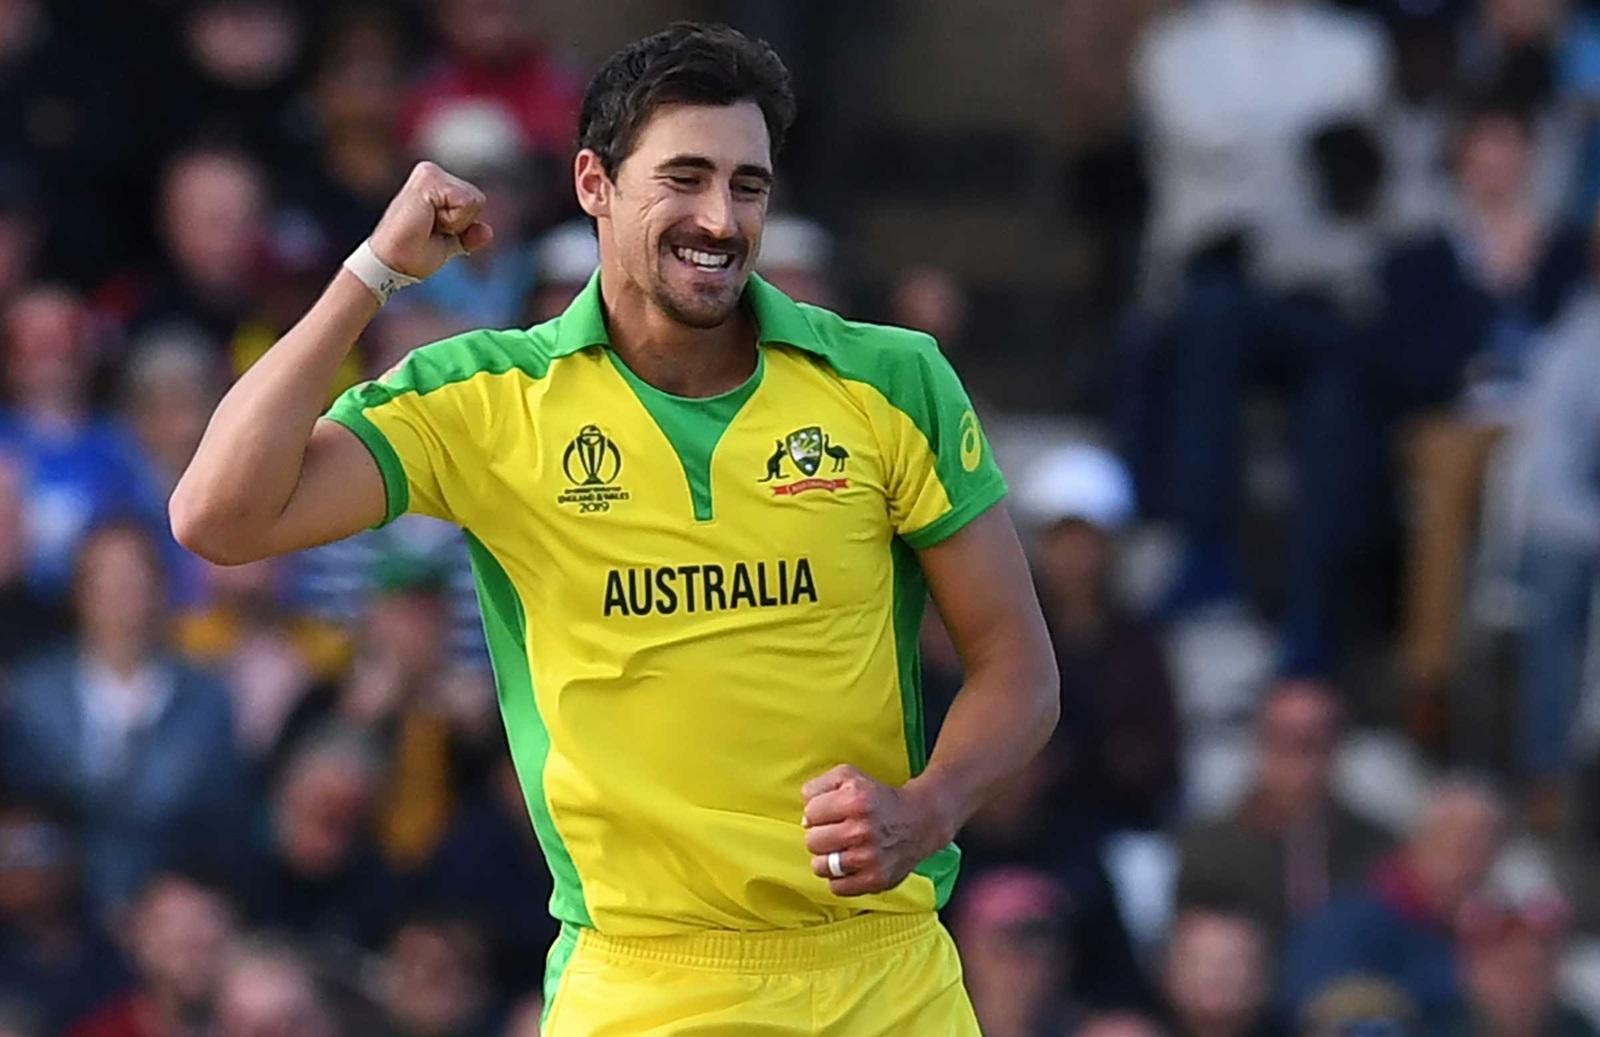 Starc hits rewind to find World Cup form